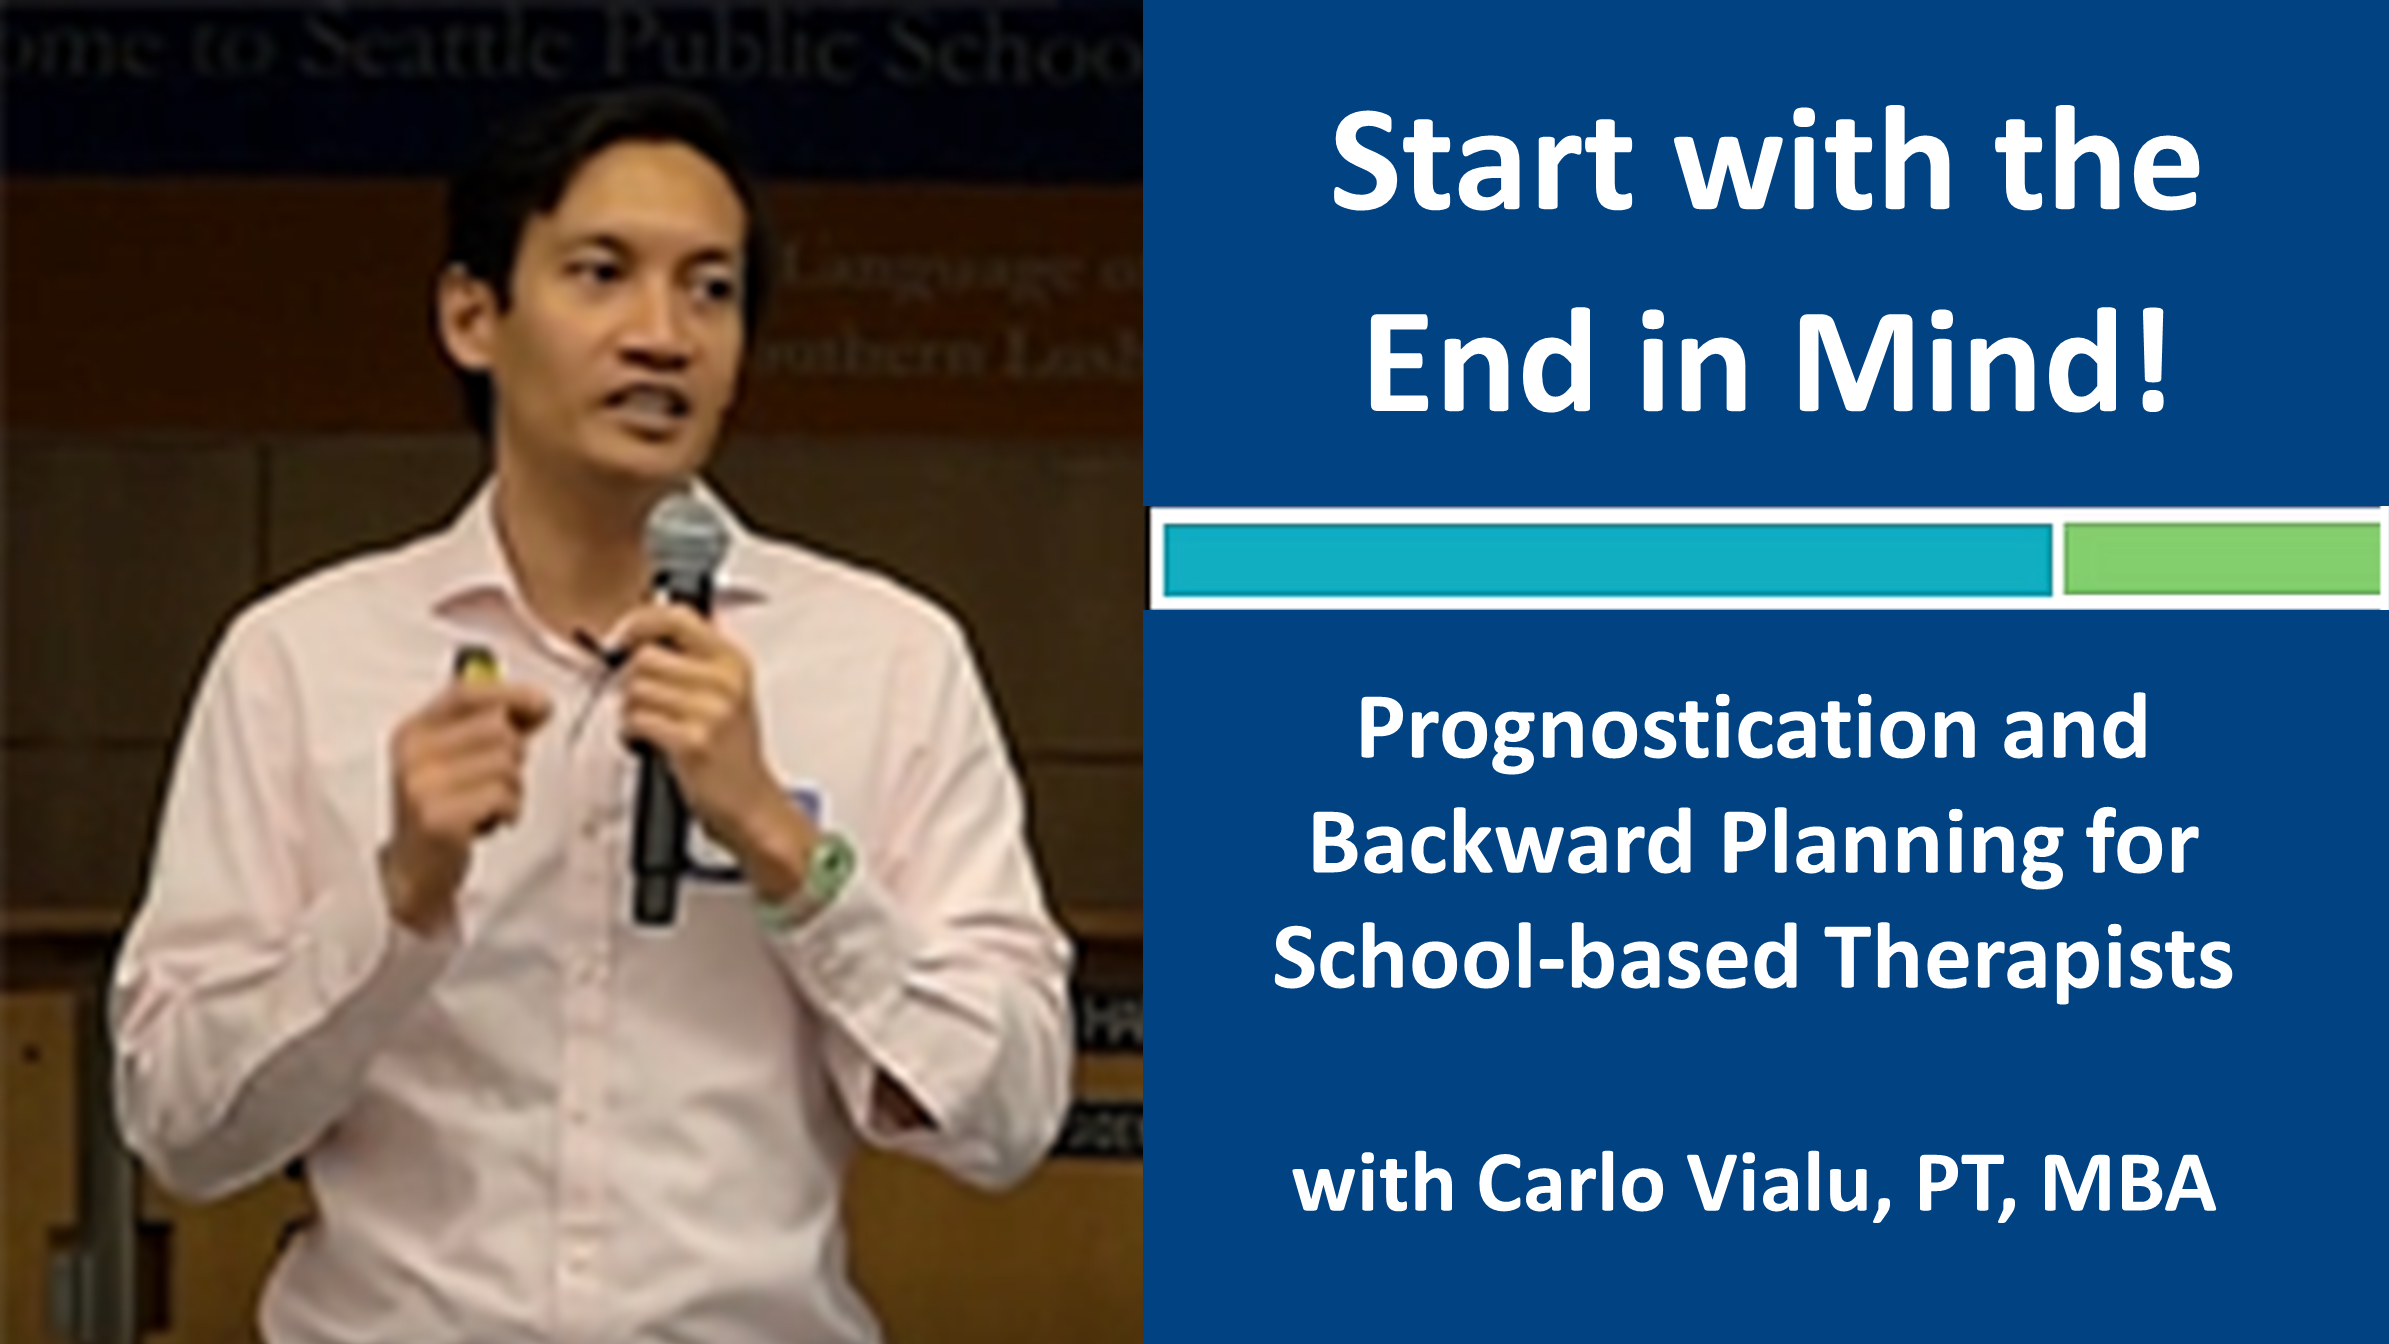 Webinar 1: Start with the End in Mind! with Carlo Vialu, PT, MBA